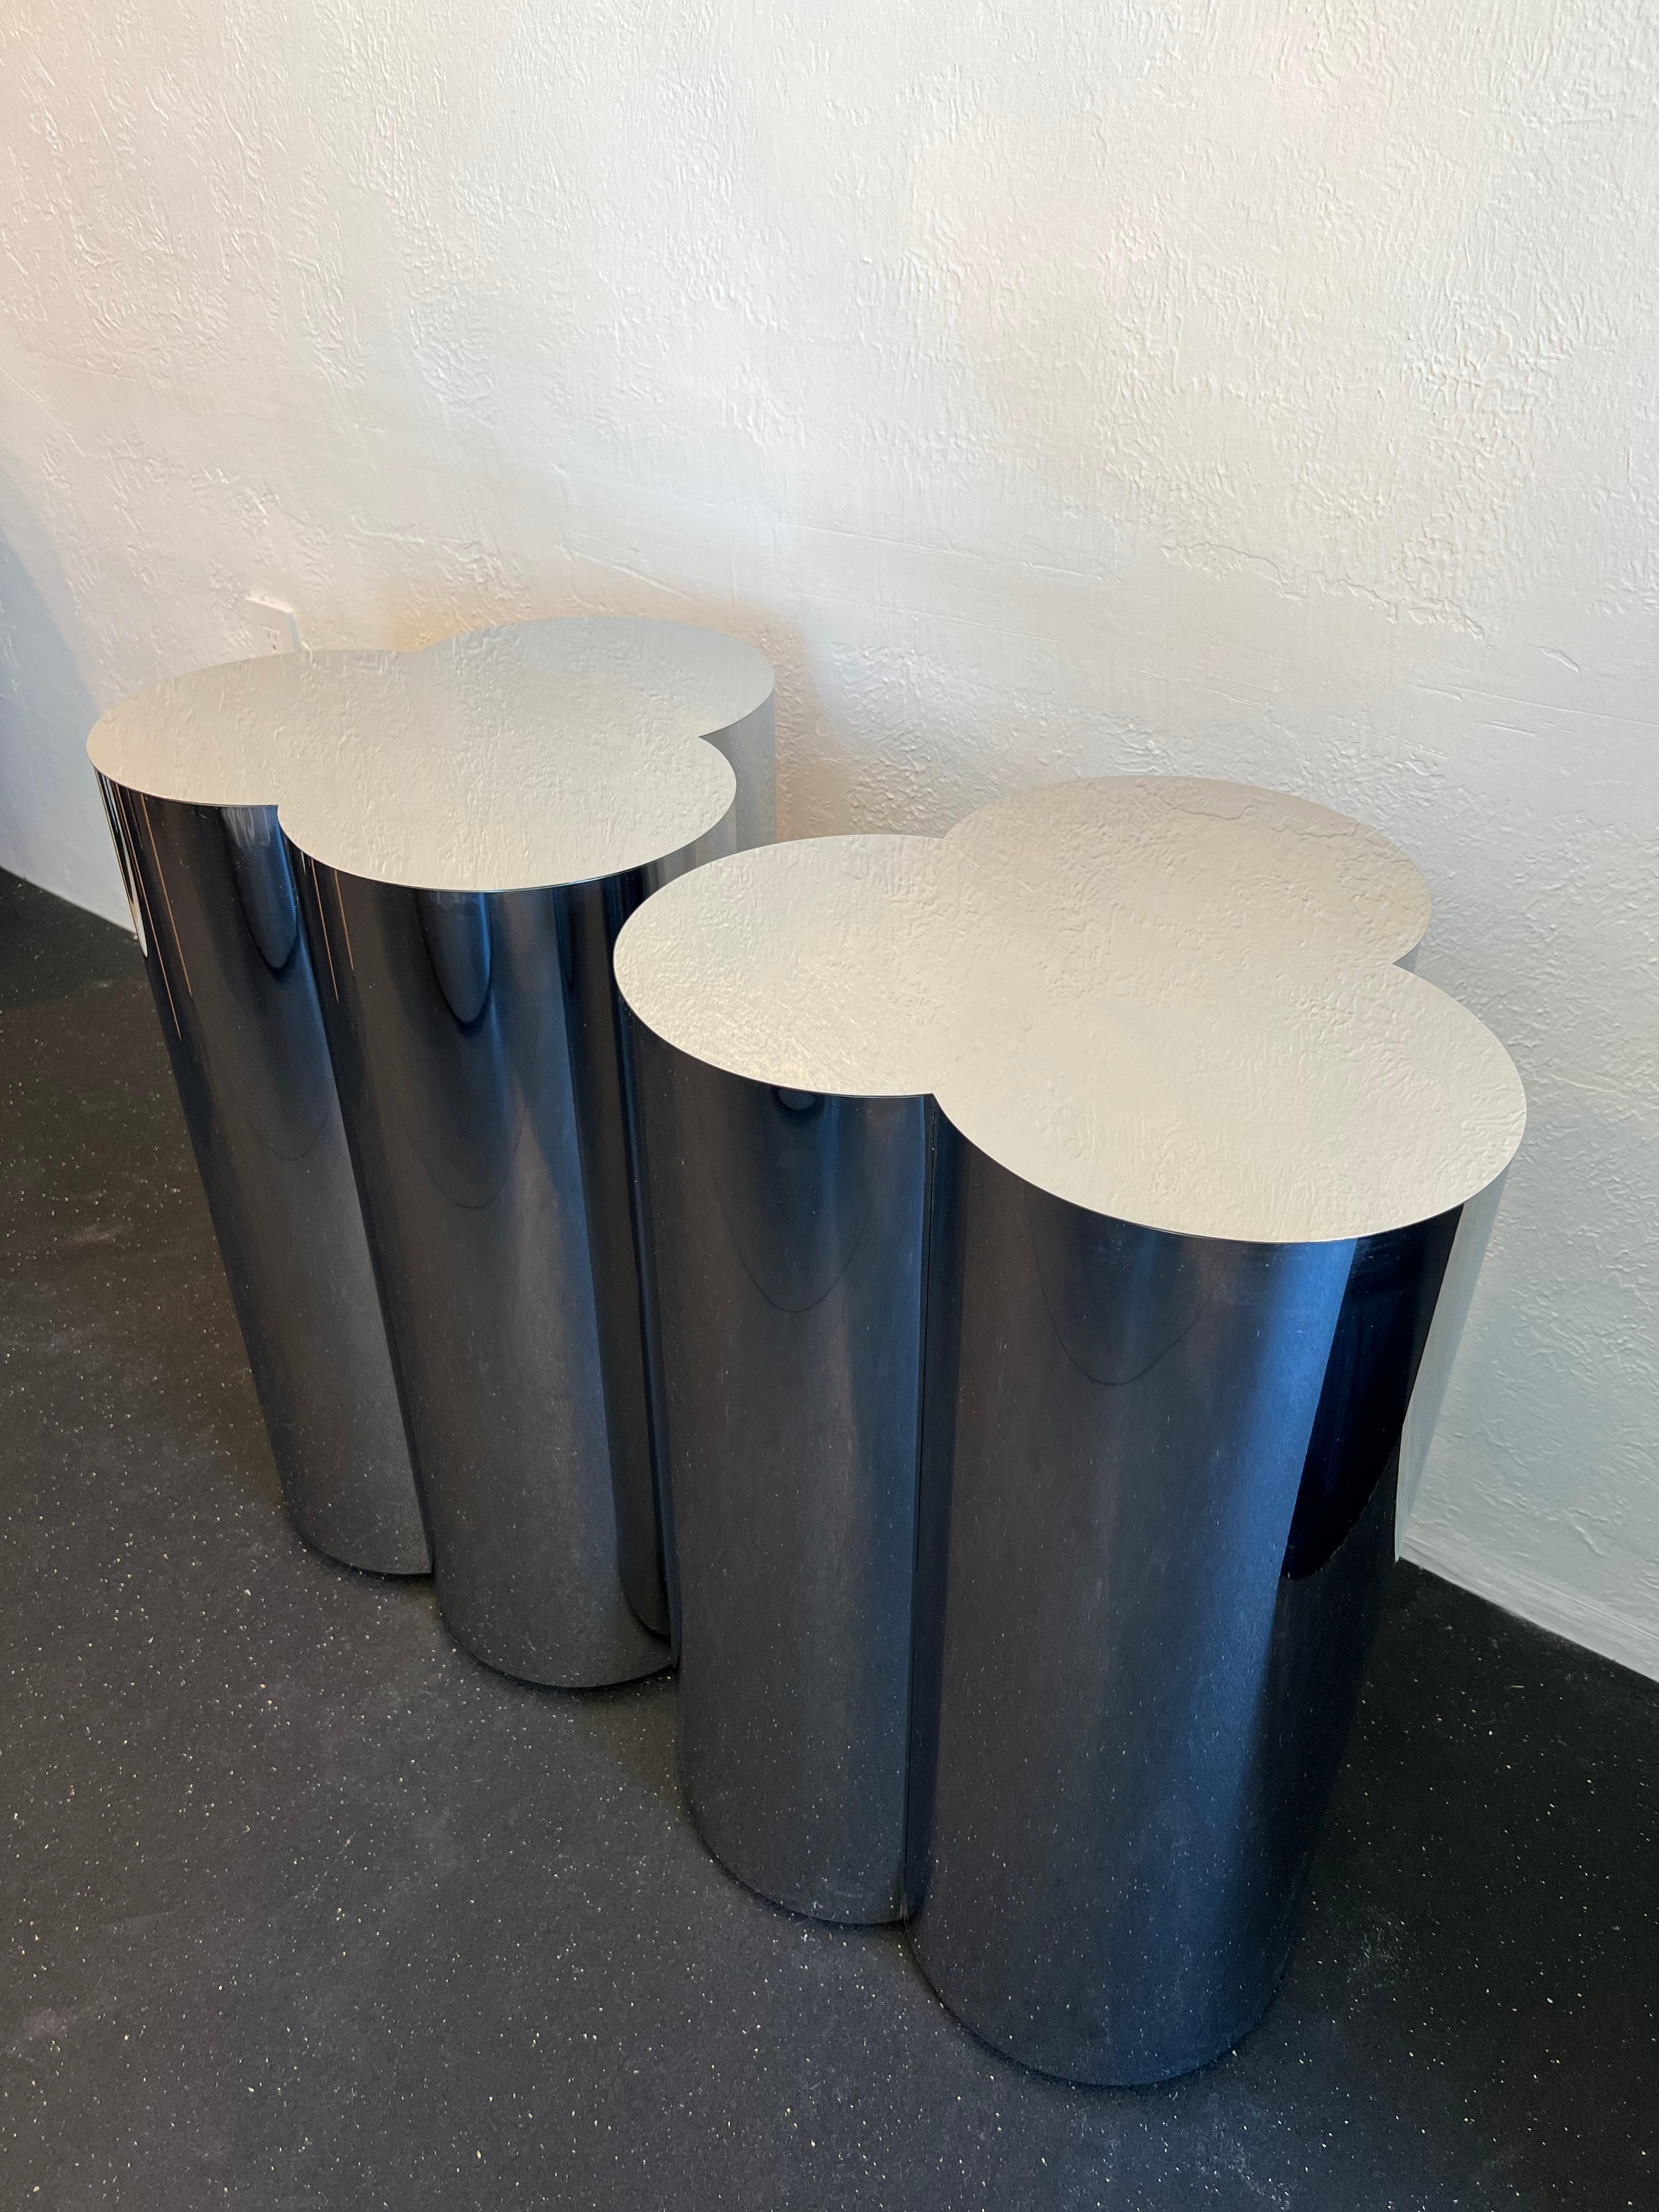 Pair of Curtis Jere chrome trefoil pedestal table bases. Unsigned. Rare pair of dining table height bases in excellent vintage condition. Adjustable screw in glides for range in height. 

Would work well in a variety of interiors such as modern,